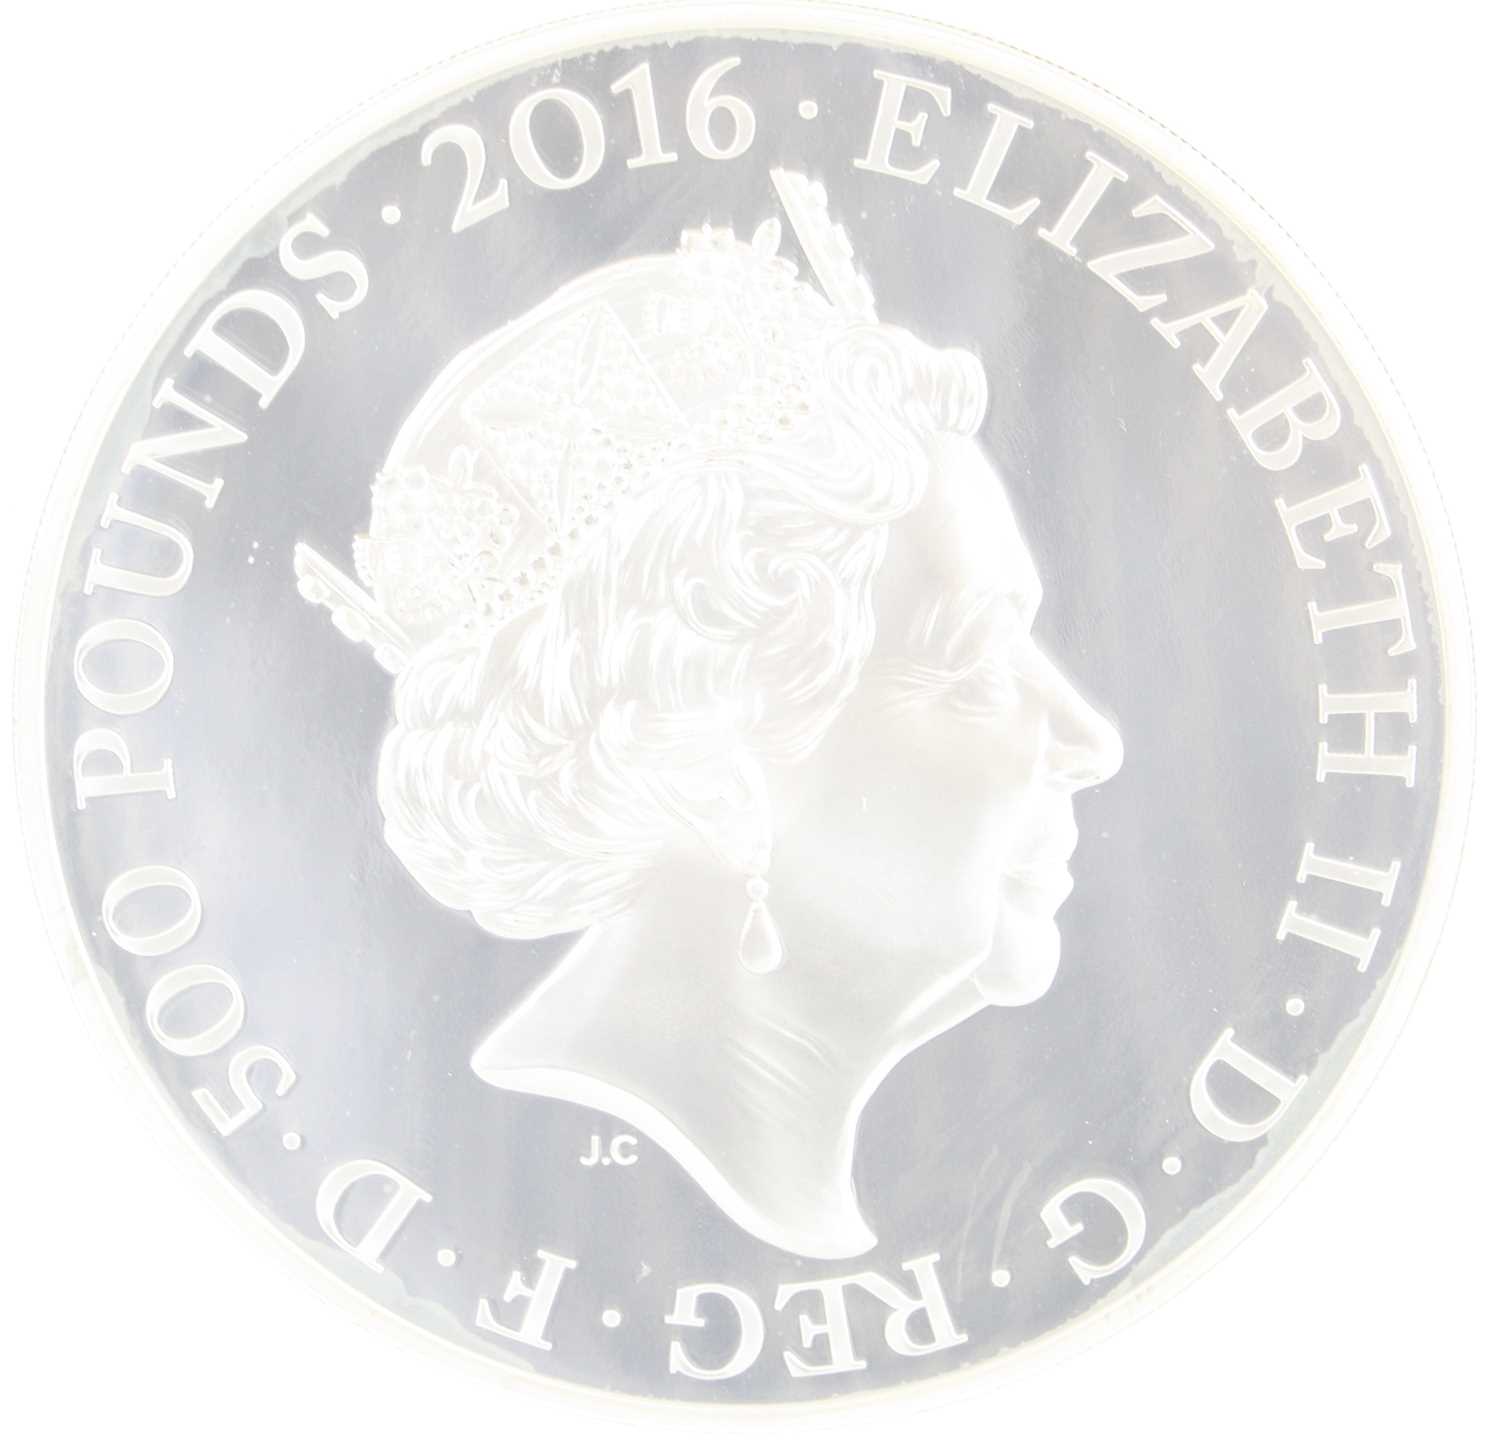 United Kingdom, The Royal Mint, 2016 Her Majesty the Queen 1 kilo silver £500 coin, obv: fifth, - Image 2 of 3